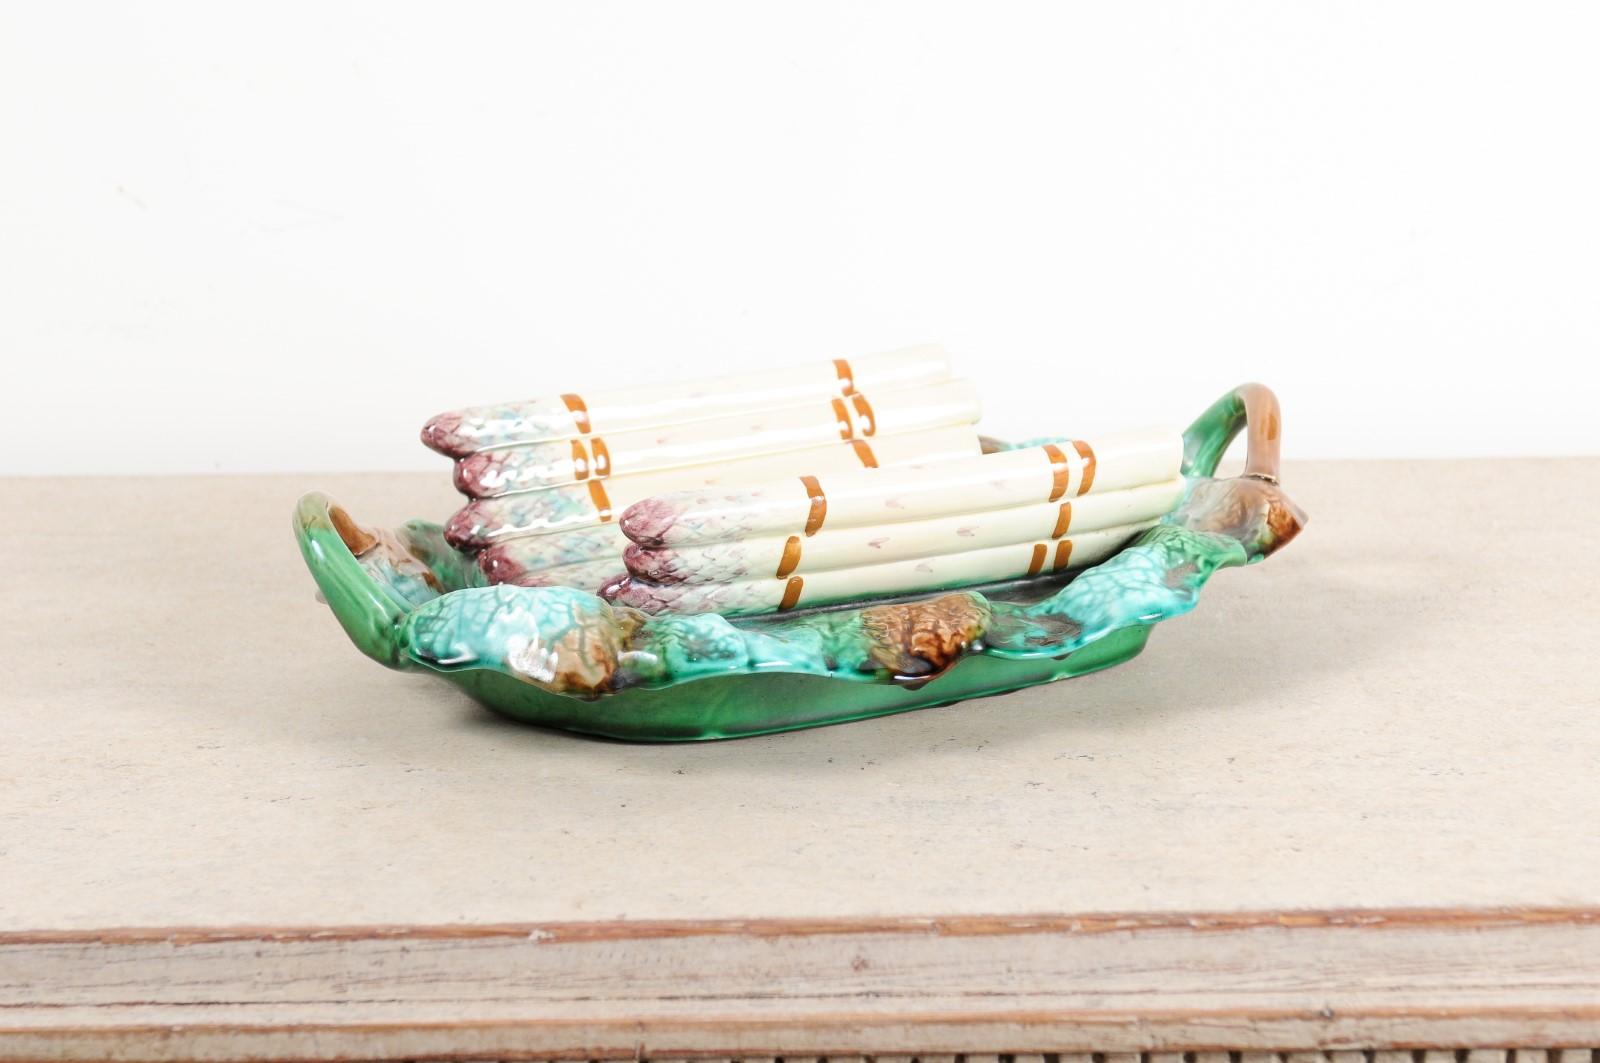 A French Longchamp Majolica asparagus server from the 19th century, with green, purple and brown tones. Created in France during the 19th century, this Majolica server features a curving cradle adorned with purple and cream colored asparagus. The